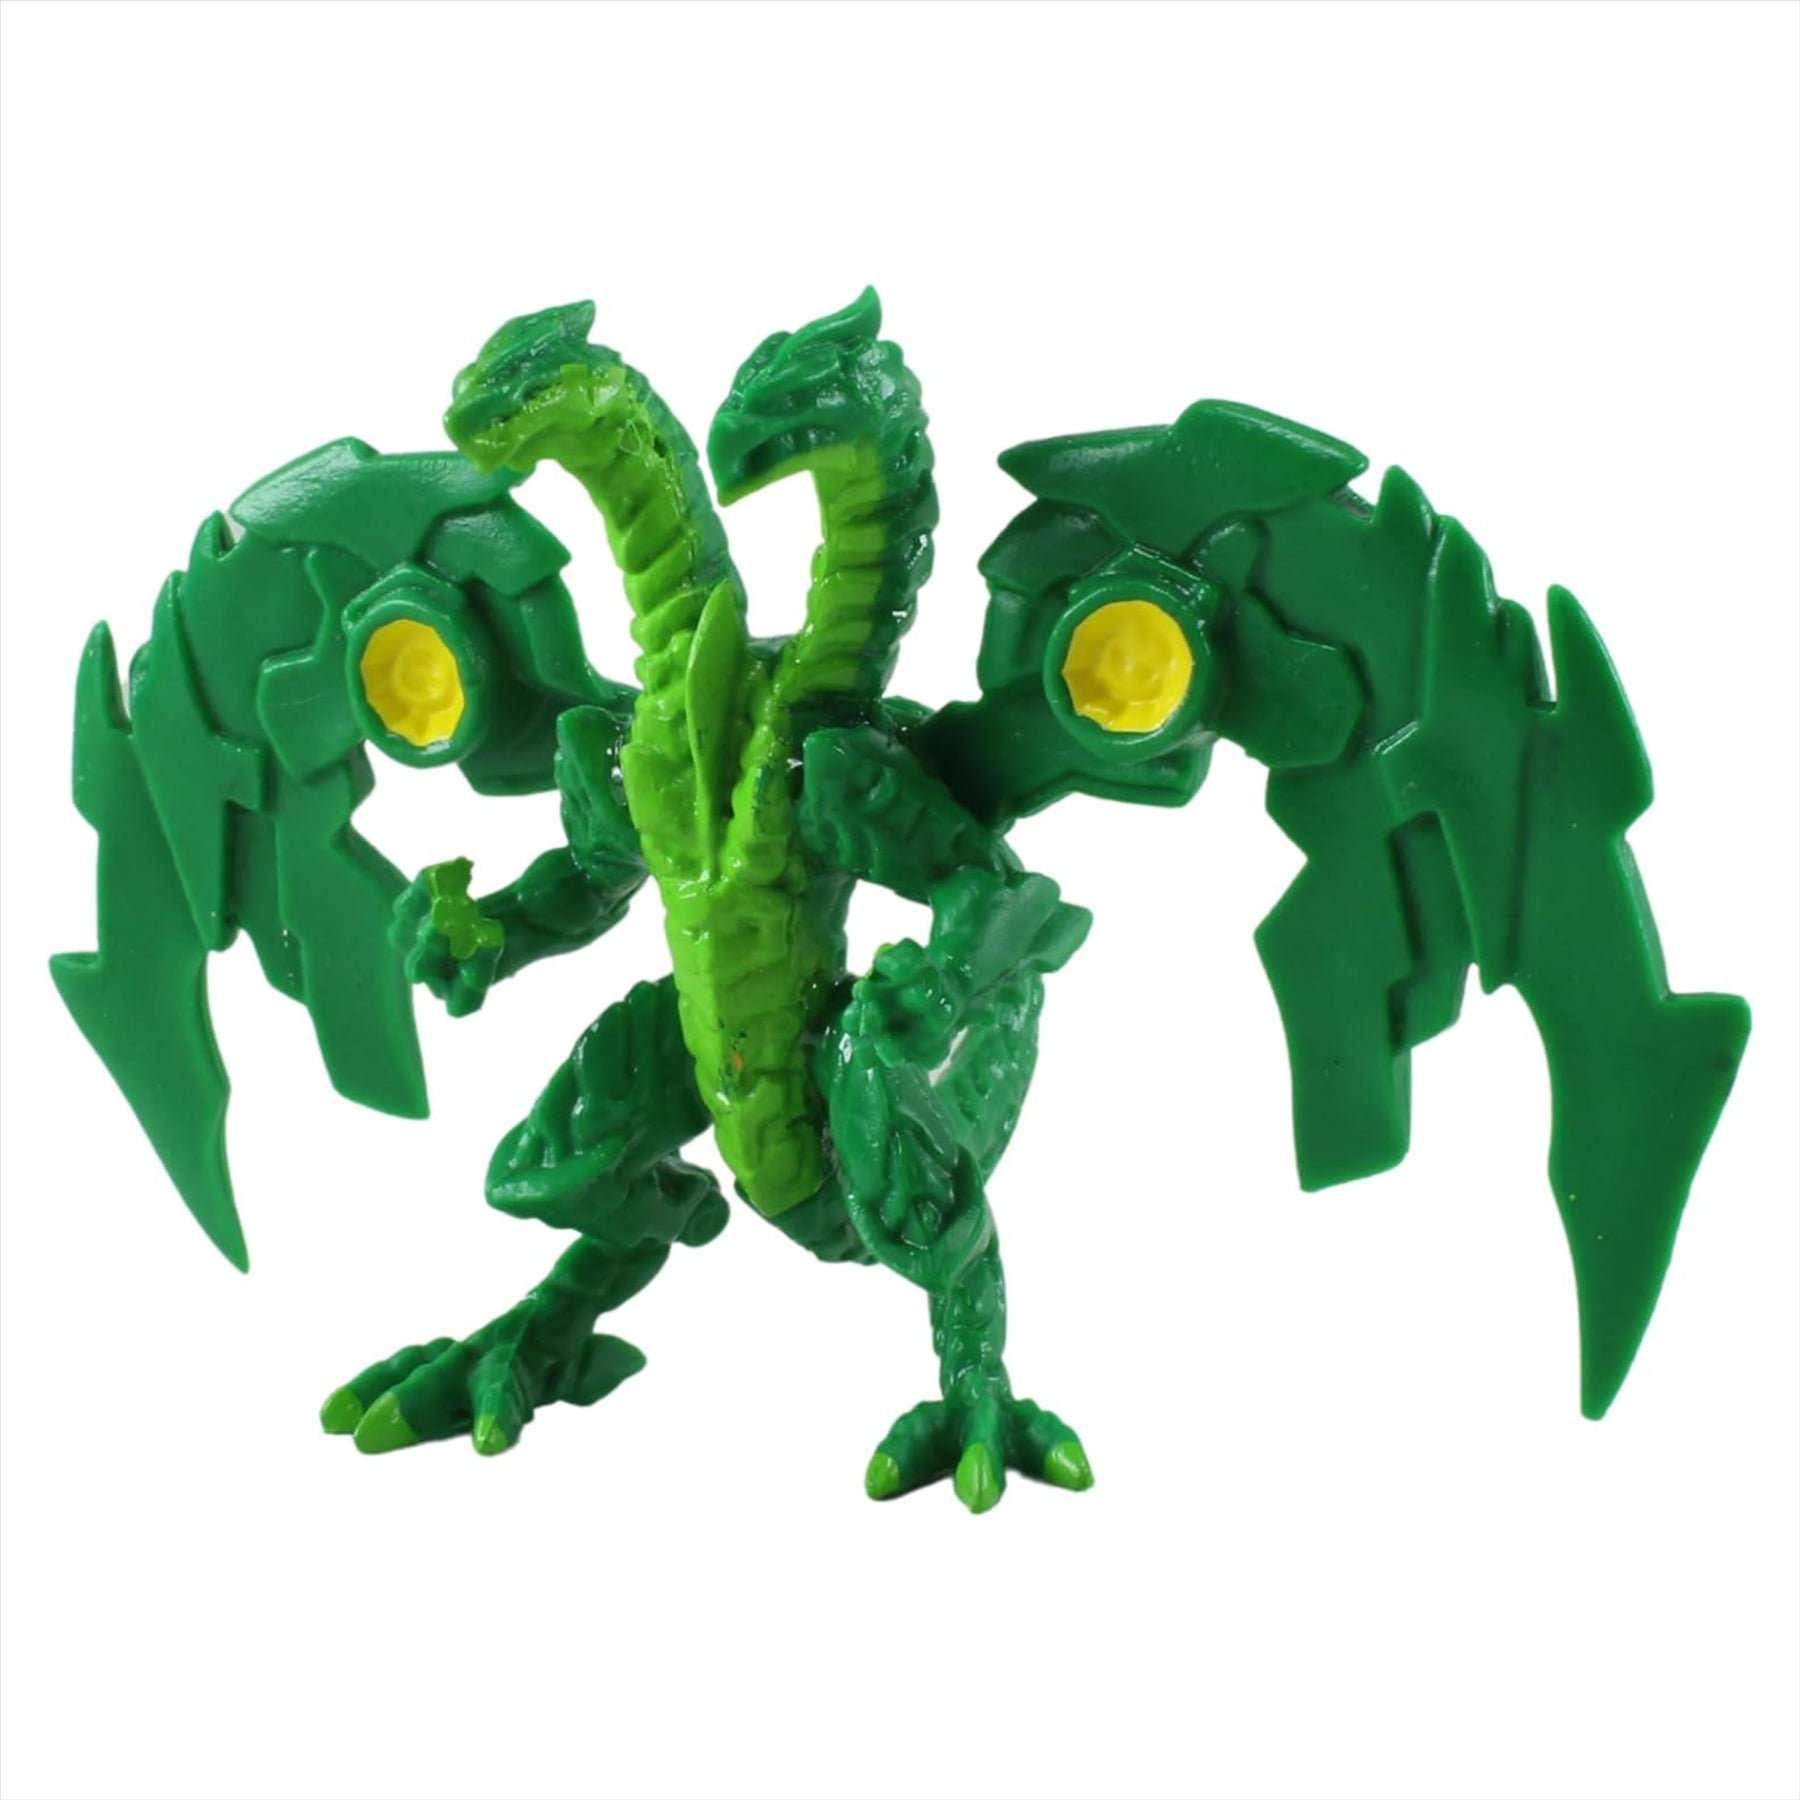 Bakugan - Deluxe Collector Figure Bundle With 2x Cards & Coin In Each Pack - Nillious Green & Dragonoid Yellow - Toptoys2u